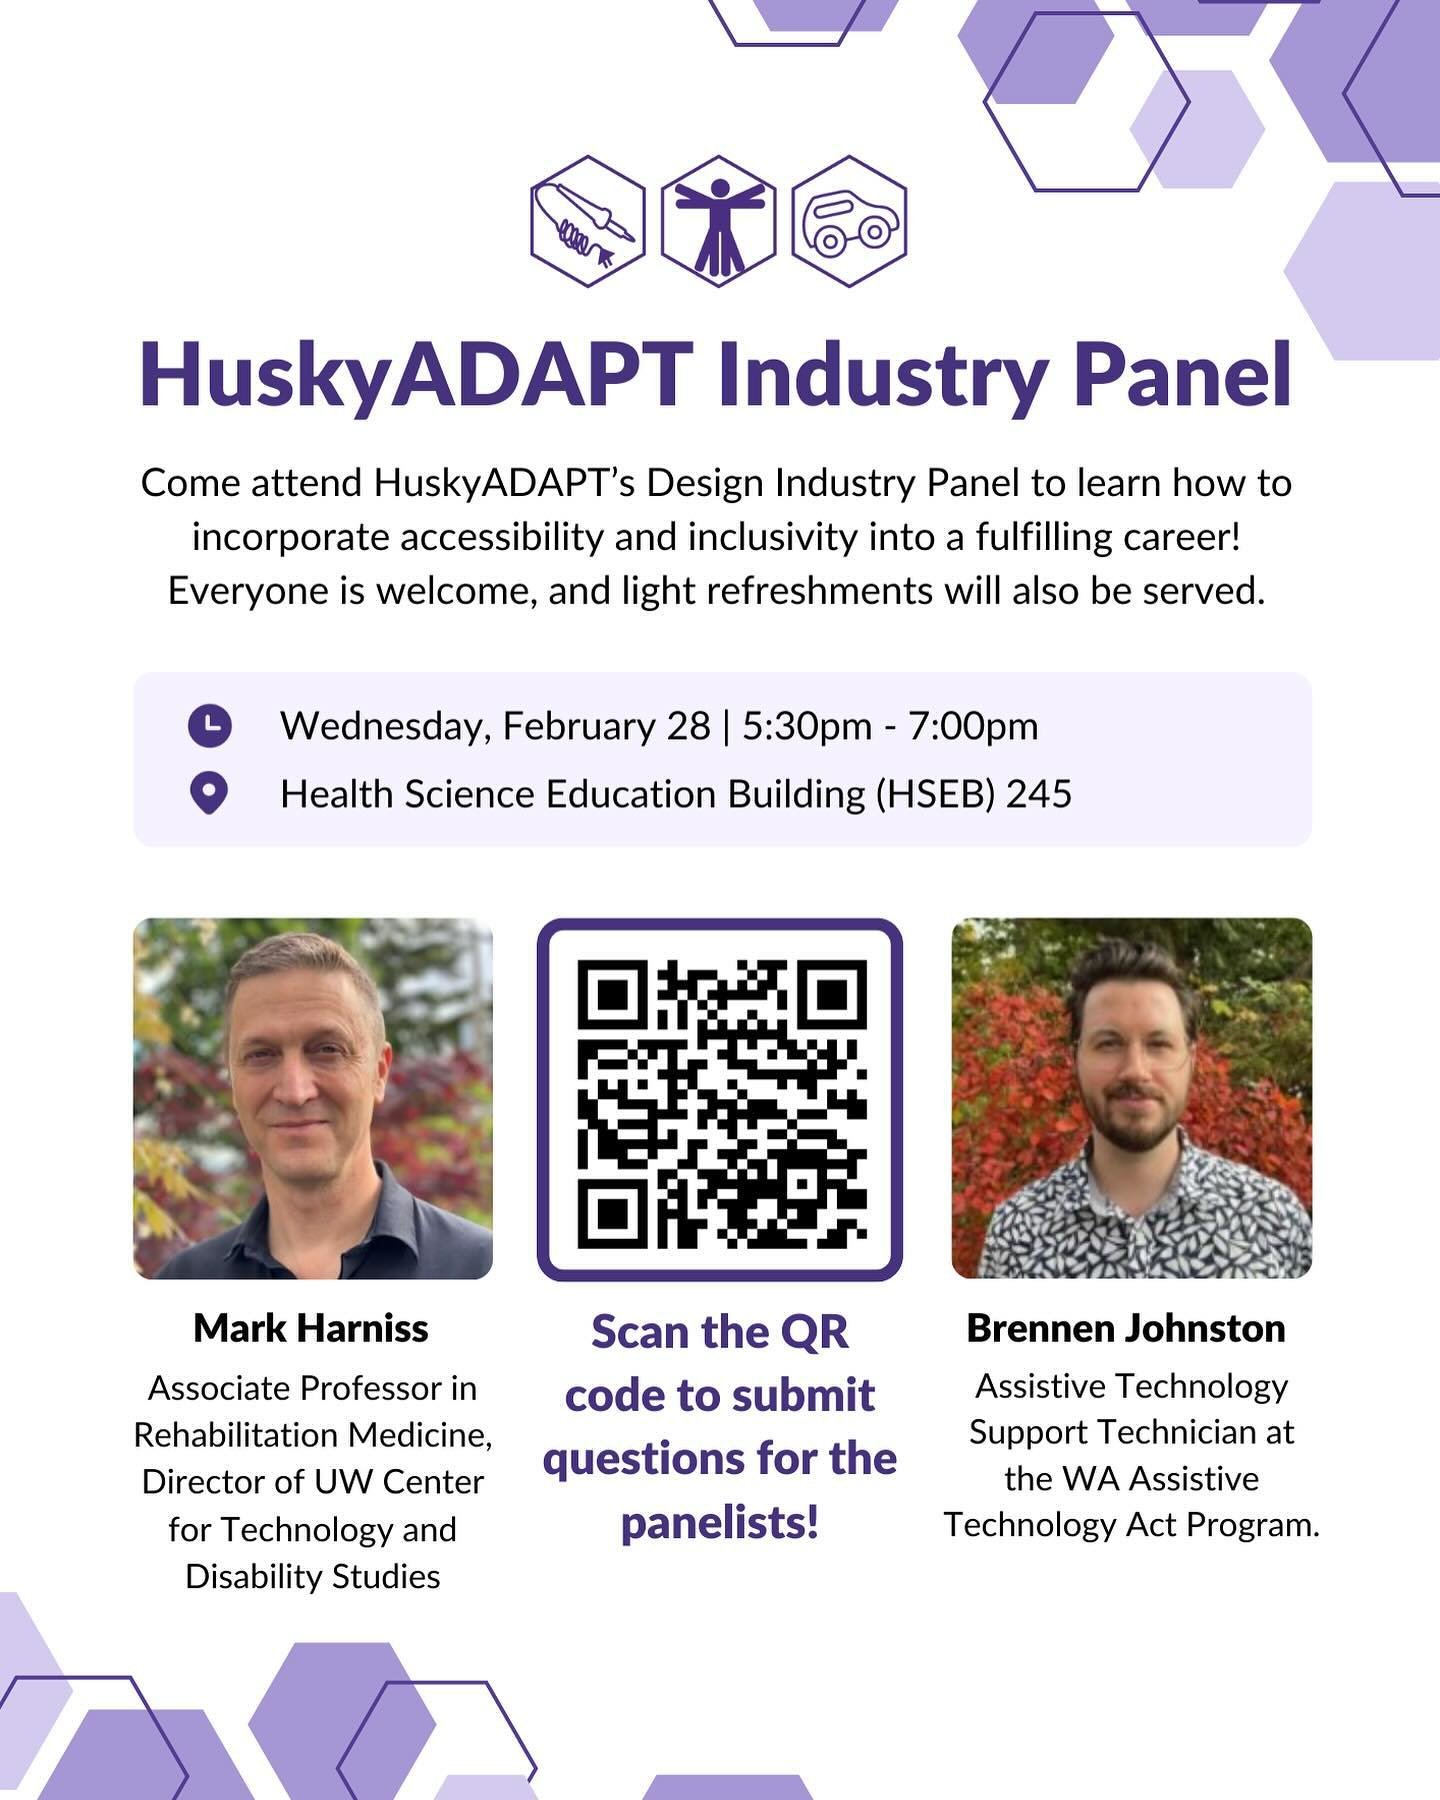 Come attend HuskyADAPT&rsquo;s Design Industry Panel to learn how to incorporate accessibility and inclusivity into a fulfilling career! Attendees will have the opportunity to ask questions and hear industry professionals&rsquo; experiences in access